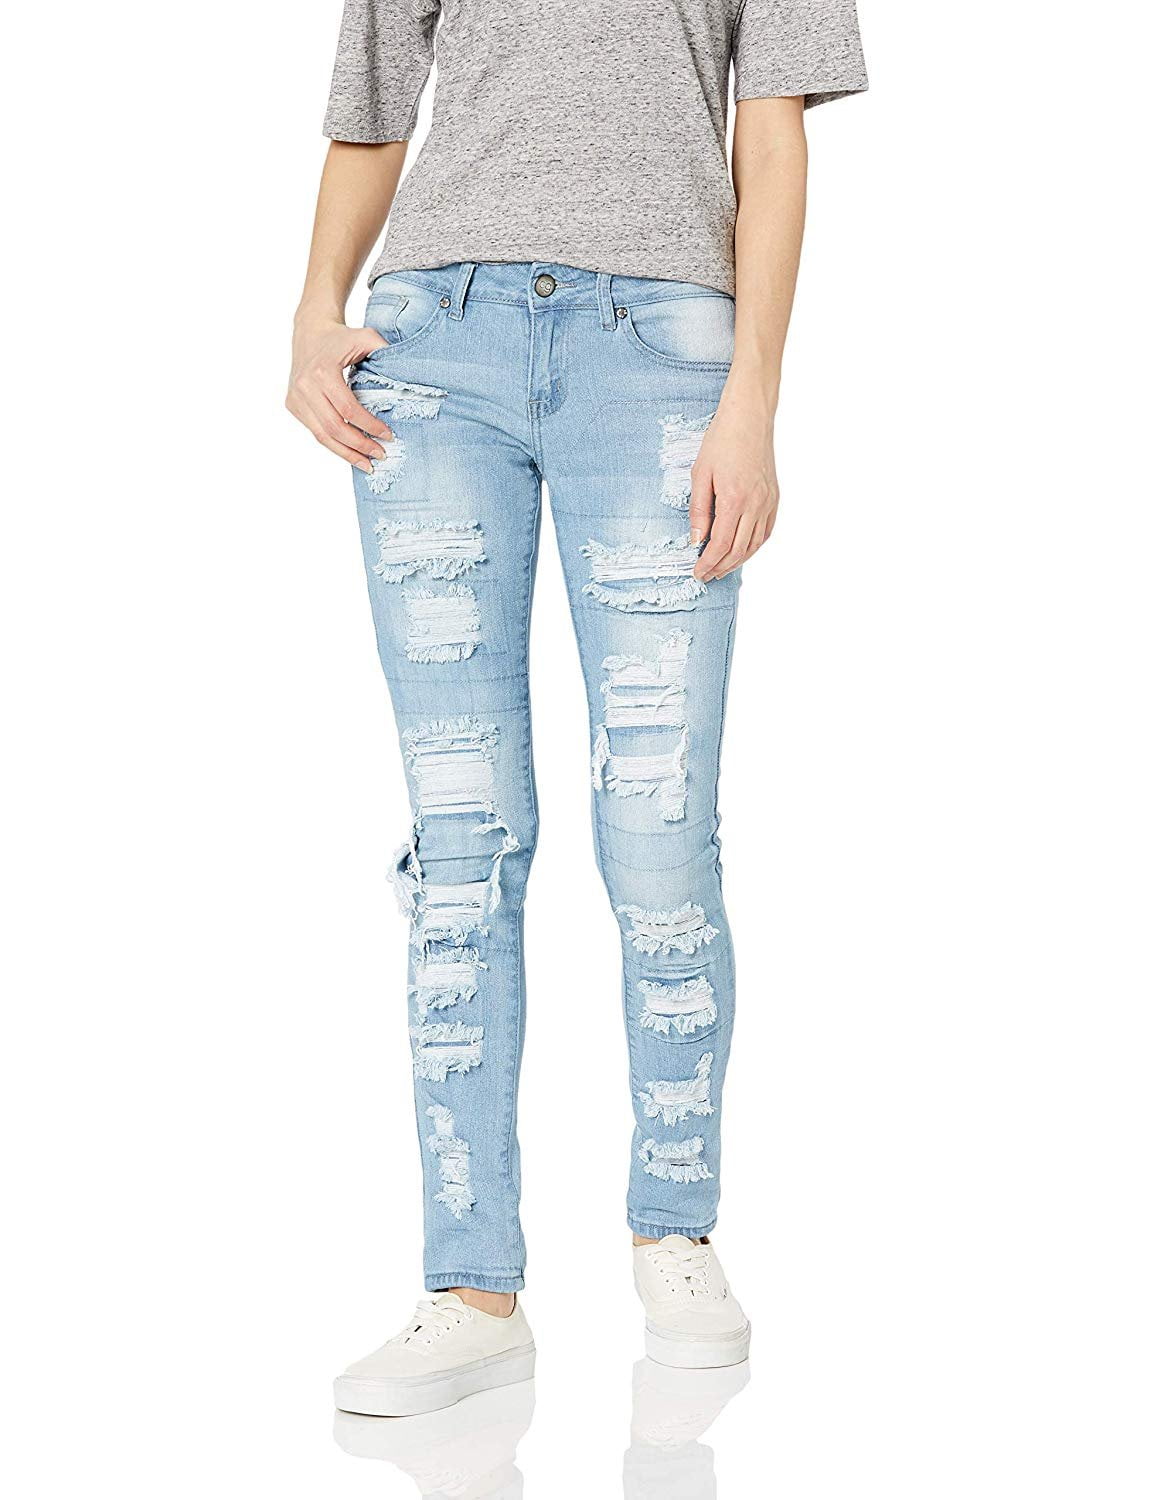 light ripped blue jeans